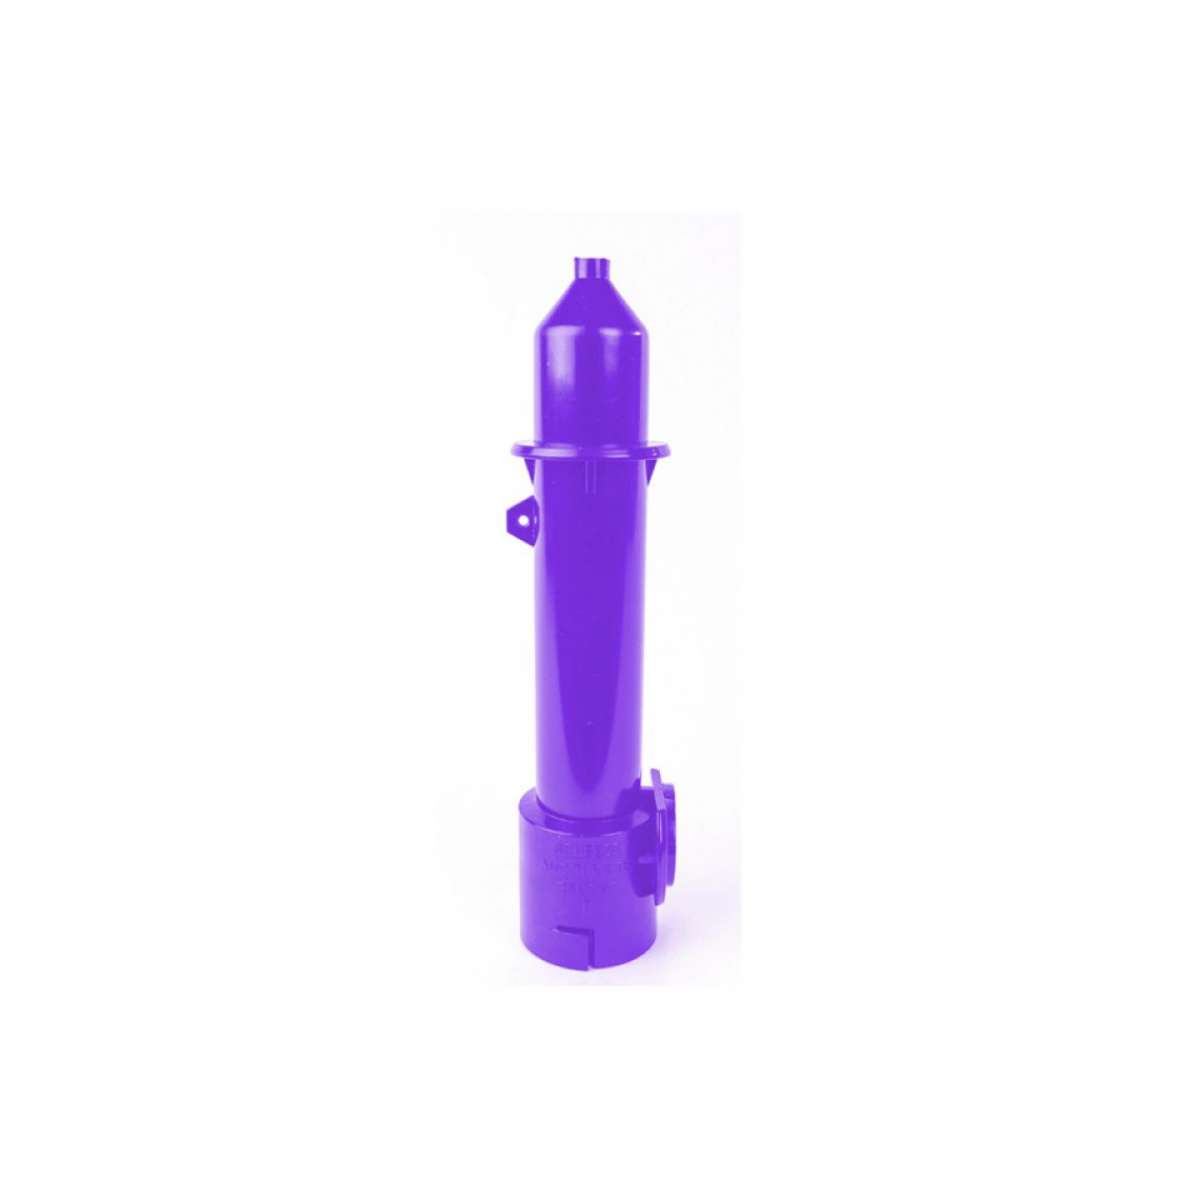 IsoLink 8" Rigid Spout with 1/4" Tip - Purple